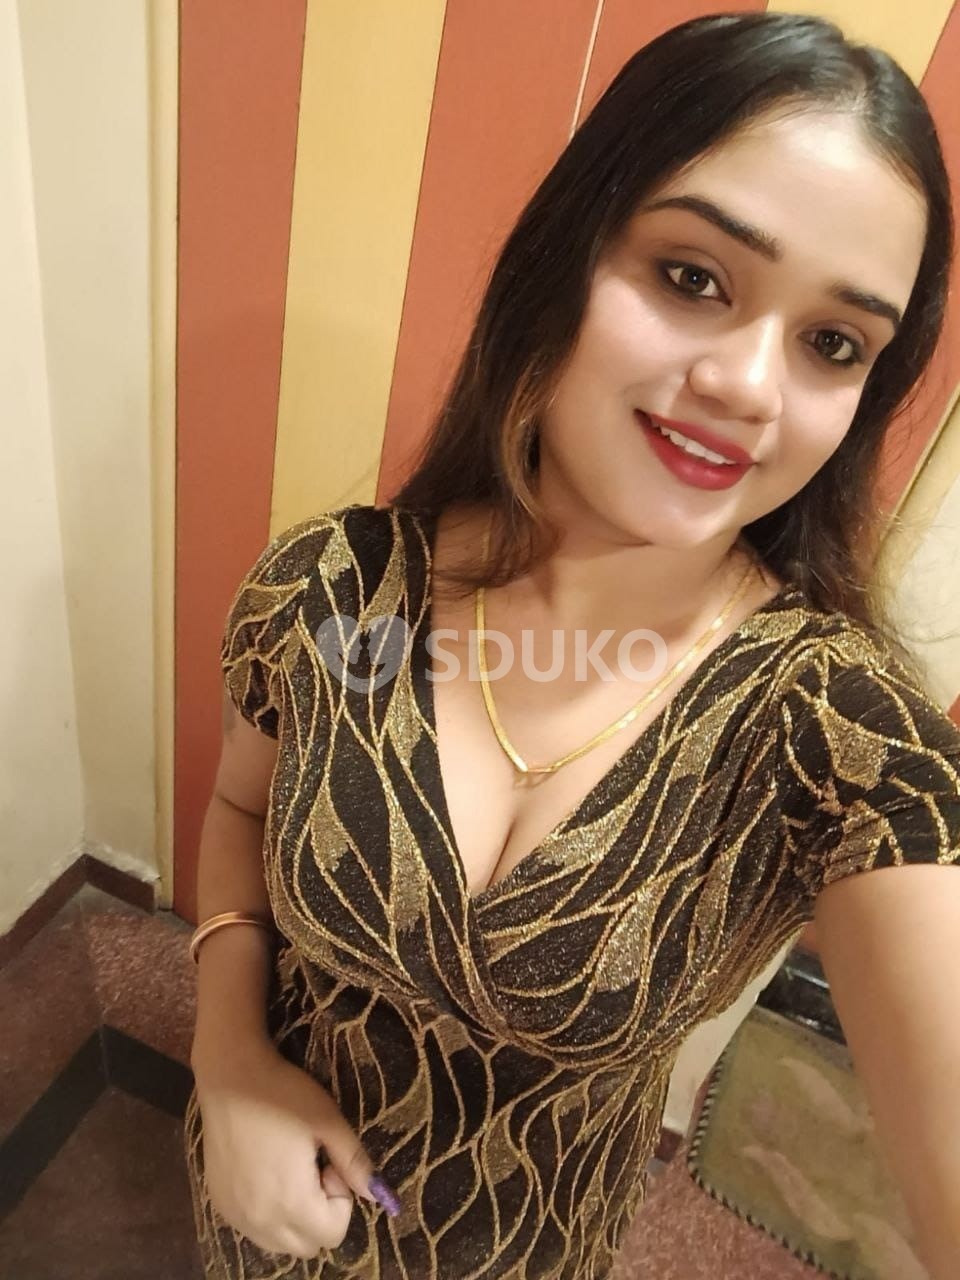 Raichur 👉 🆑Low price 100%;:::genuine👥sexy VIP call girls are provided👌 safe and secure service .call 📞